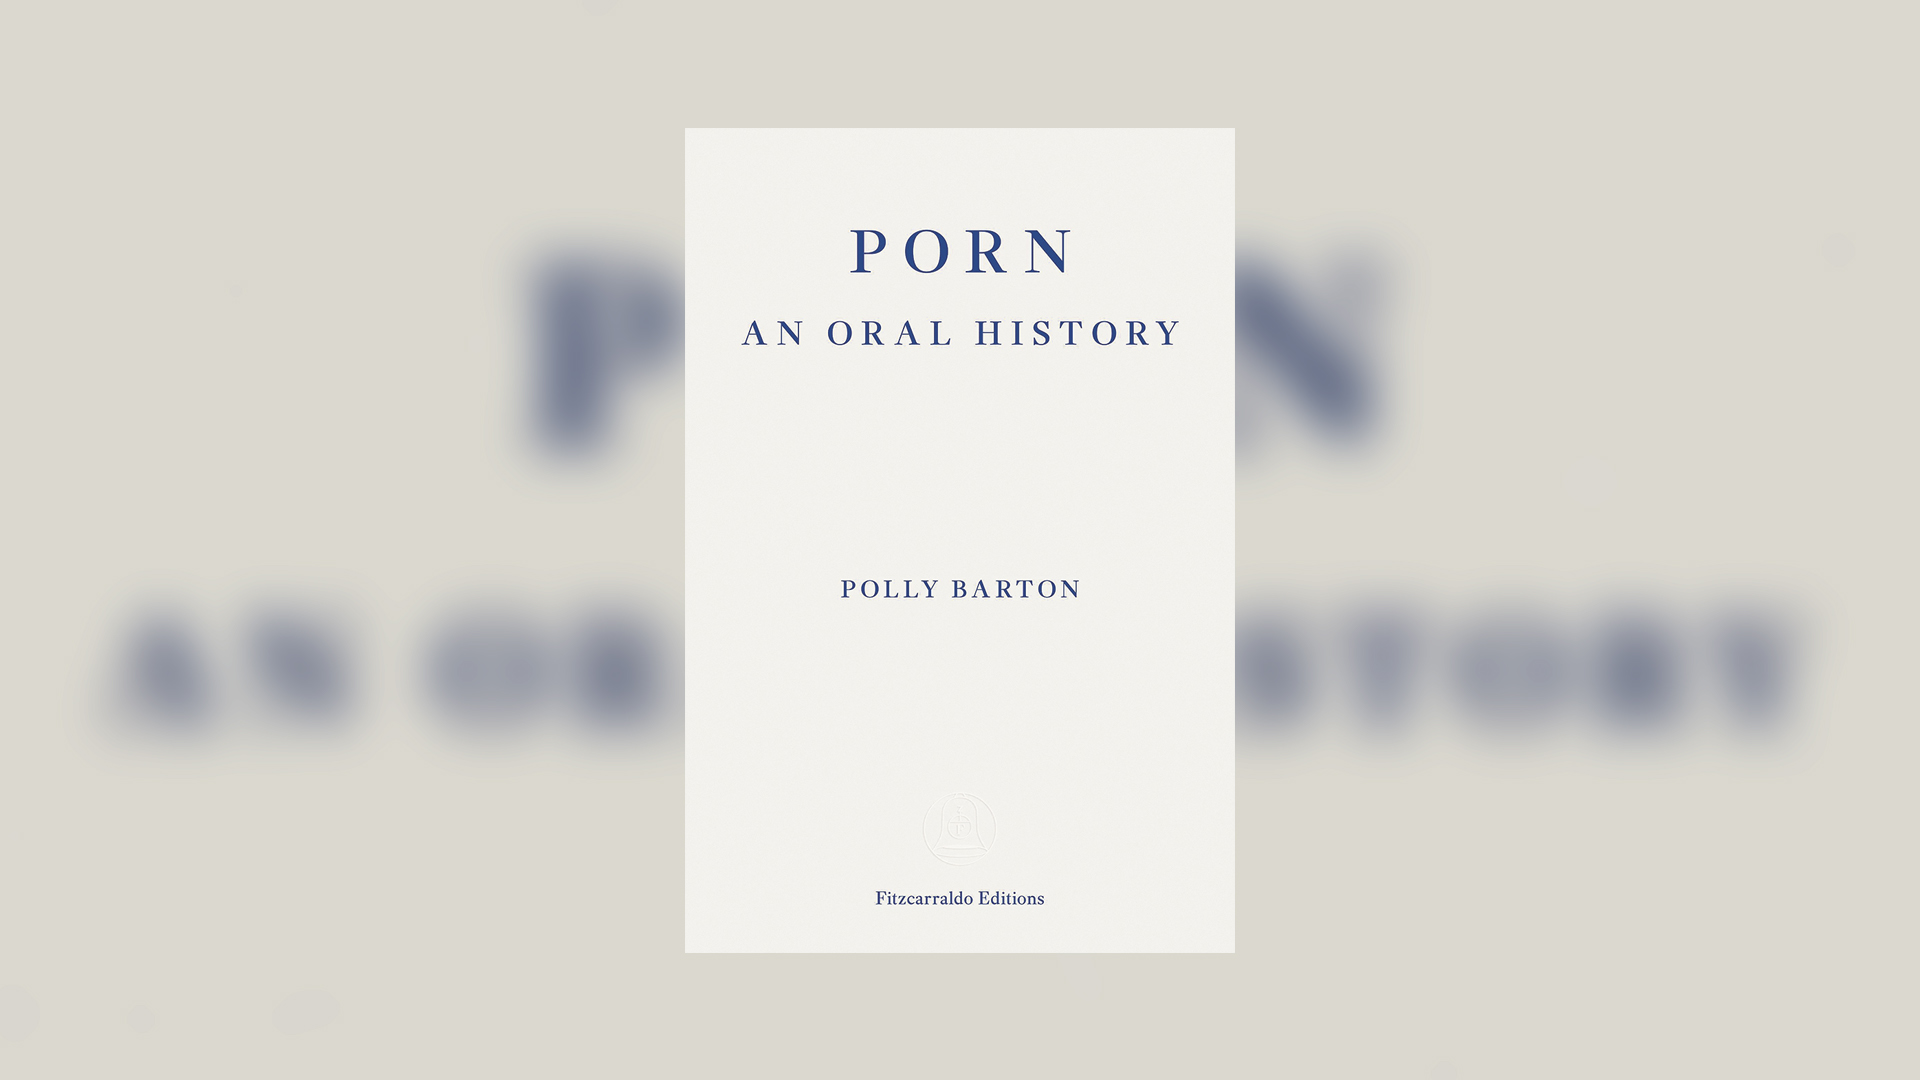 Porn: An Oral History book cover